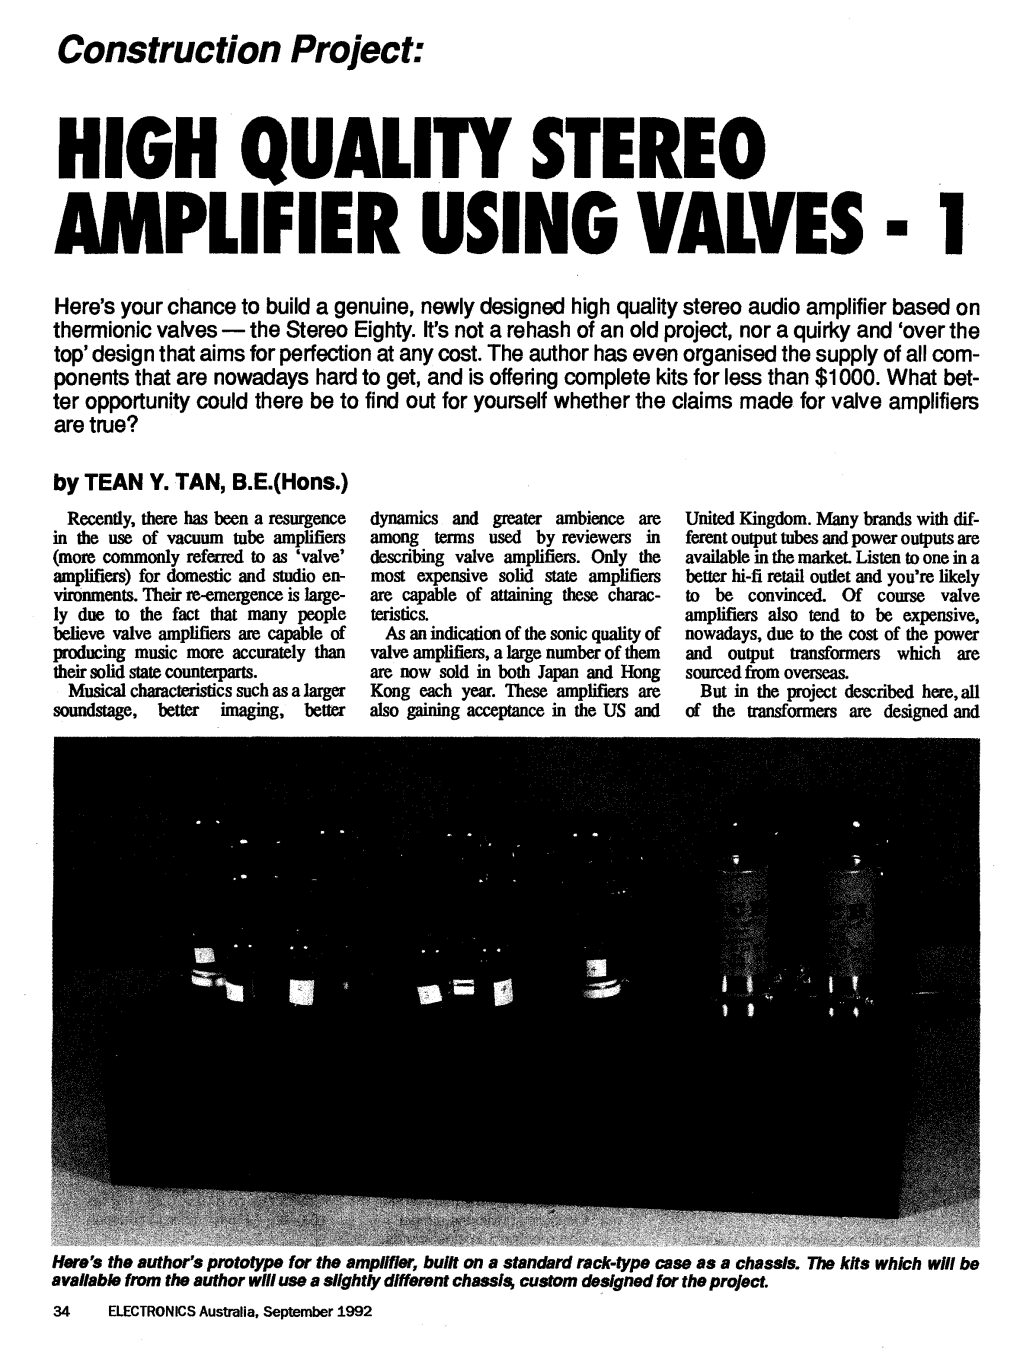 High Quality Stereo Amplifier Using Valves - 1